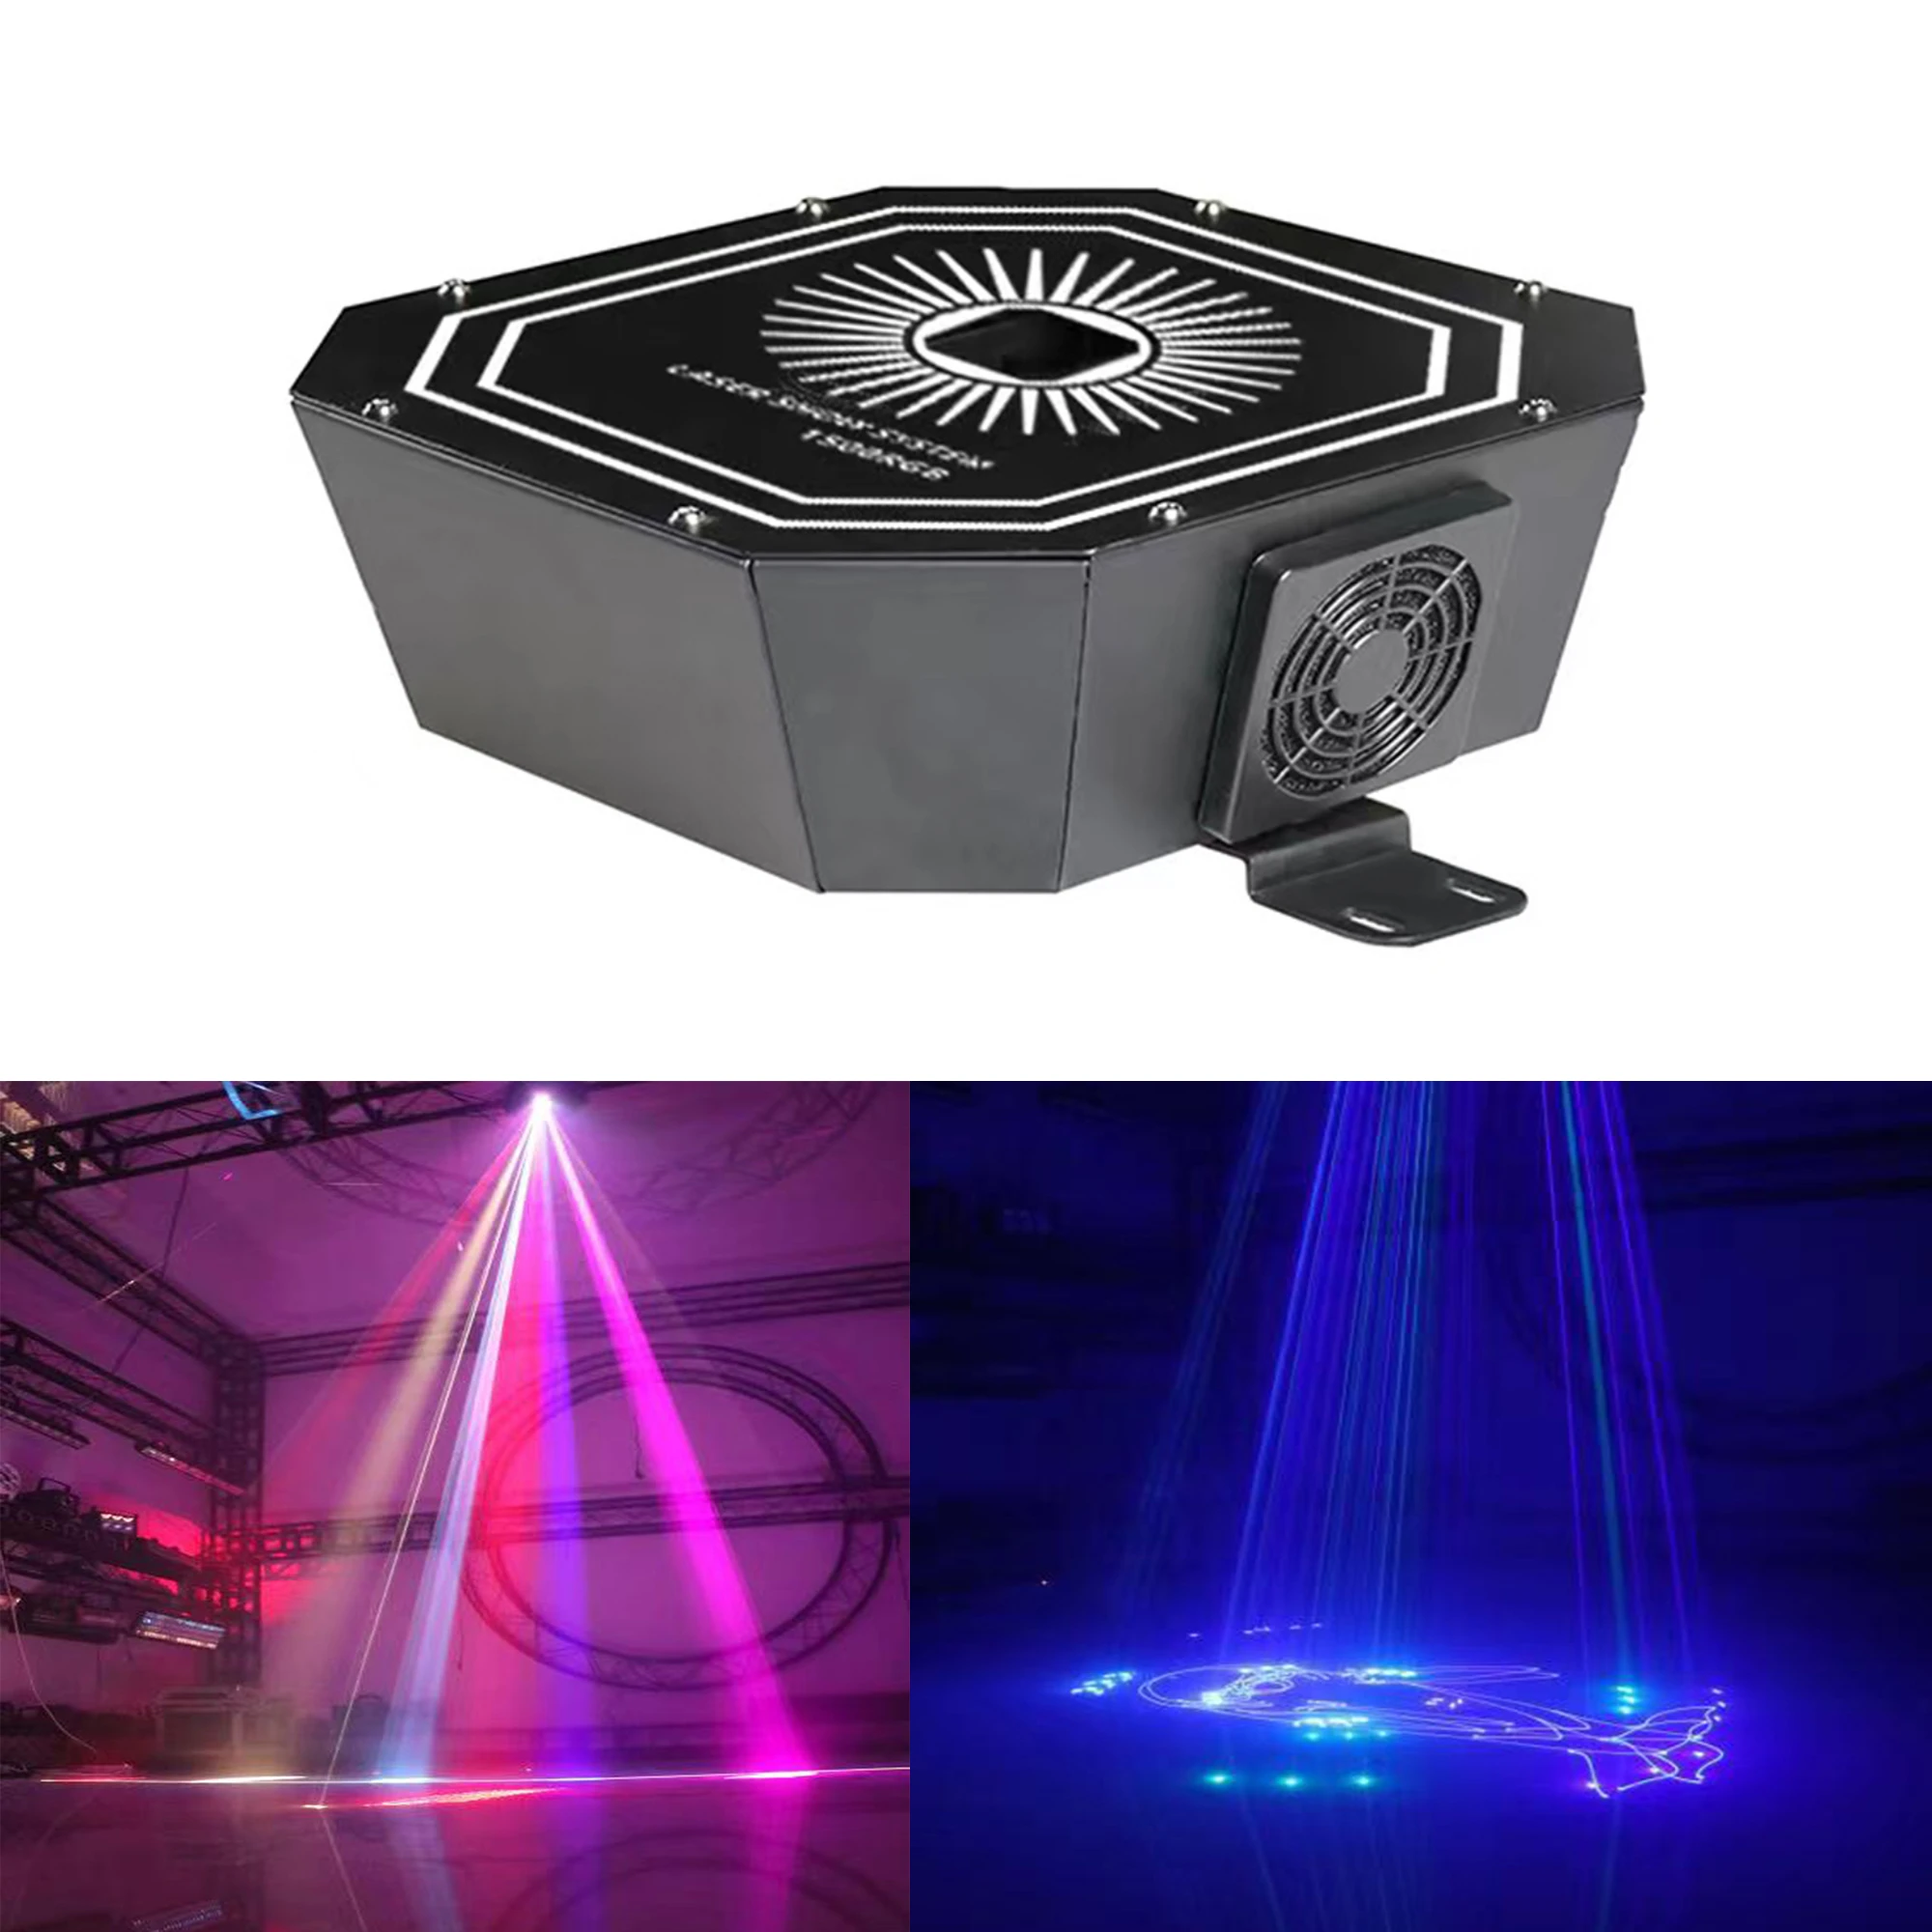 1.5w Rgb Upside Down Laser Light Recharge Rgb Laser Projection Lamp Stage  Lighting Show For Home Party Ktv Dj Dance Floor - Stage Lighting Effect -  AliExpress